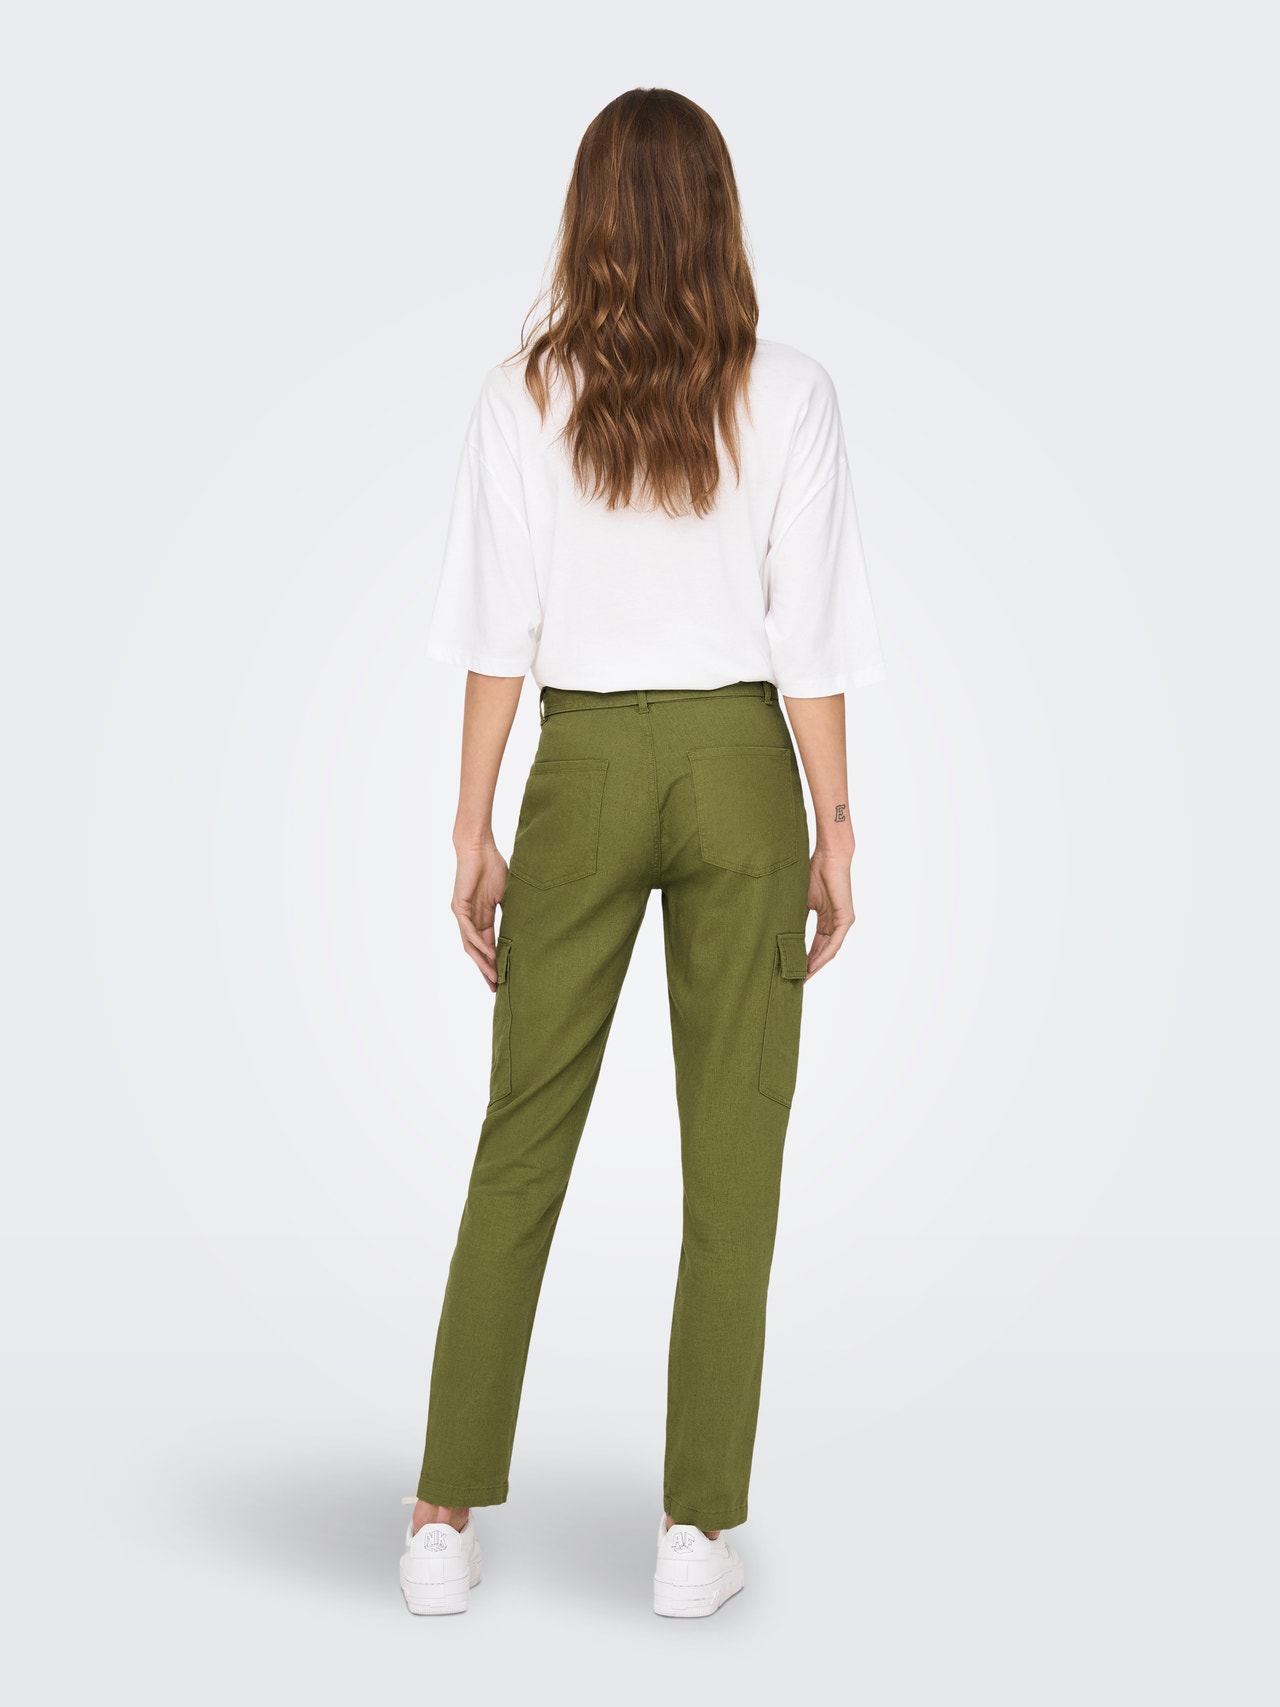 ONLY High waisted Cargo Pants With Belt -Olive Branch - 15278728